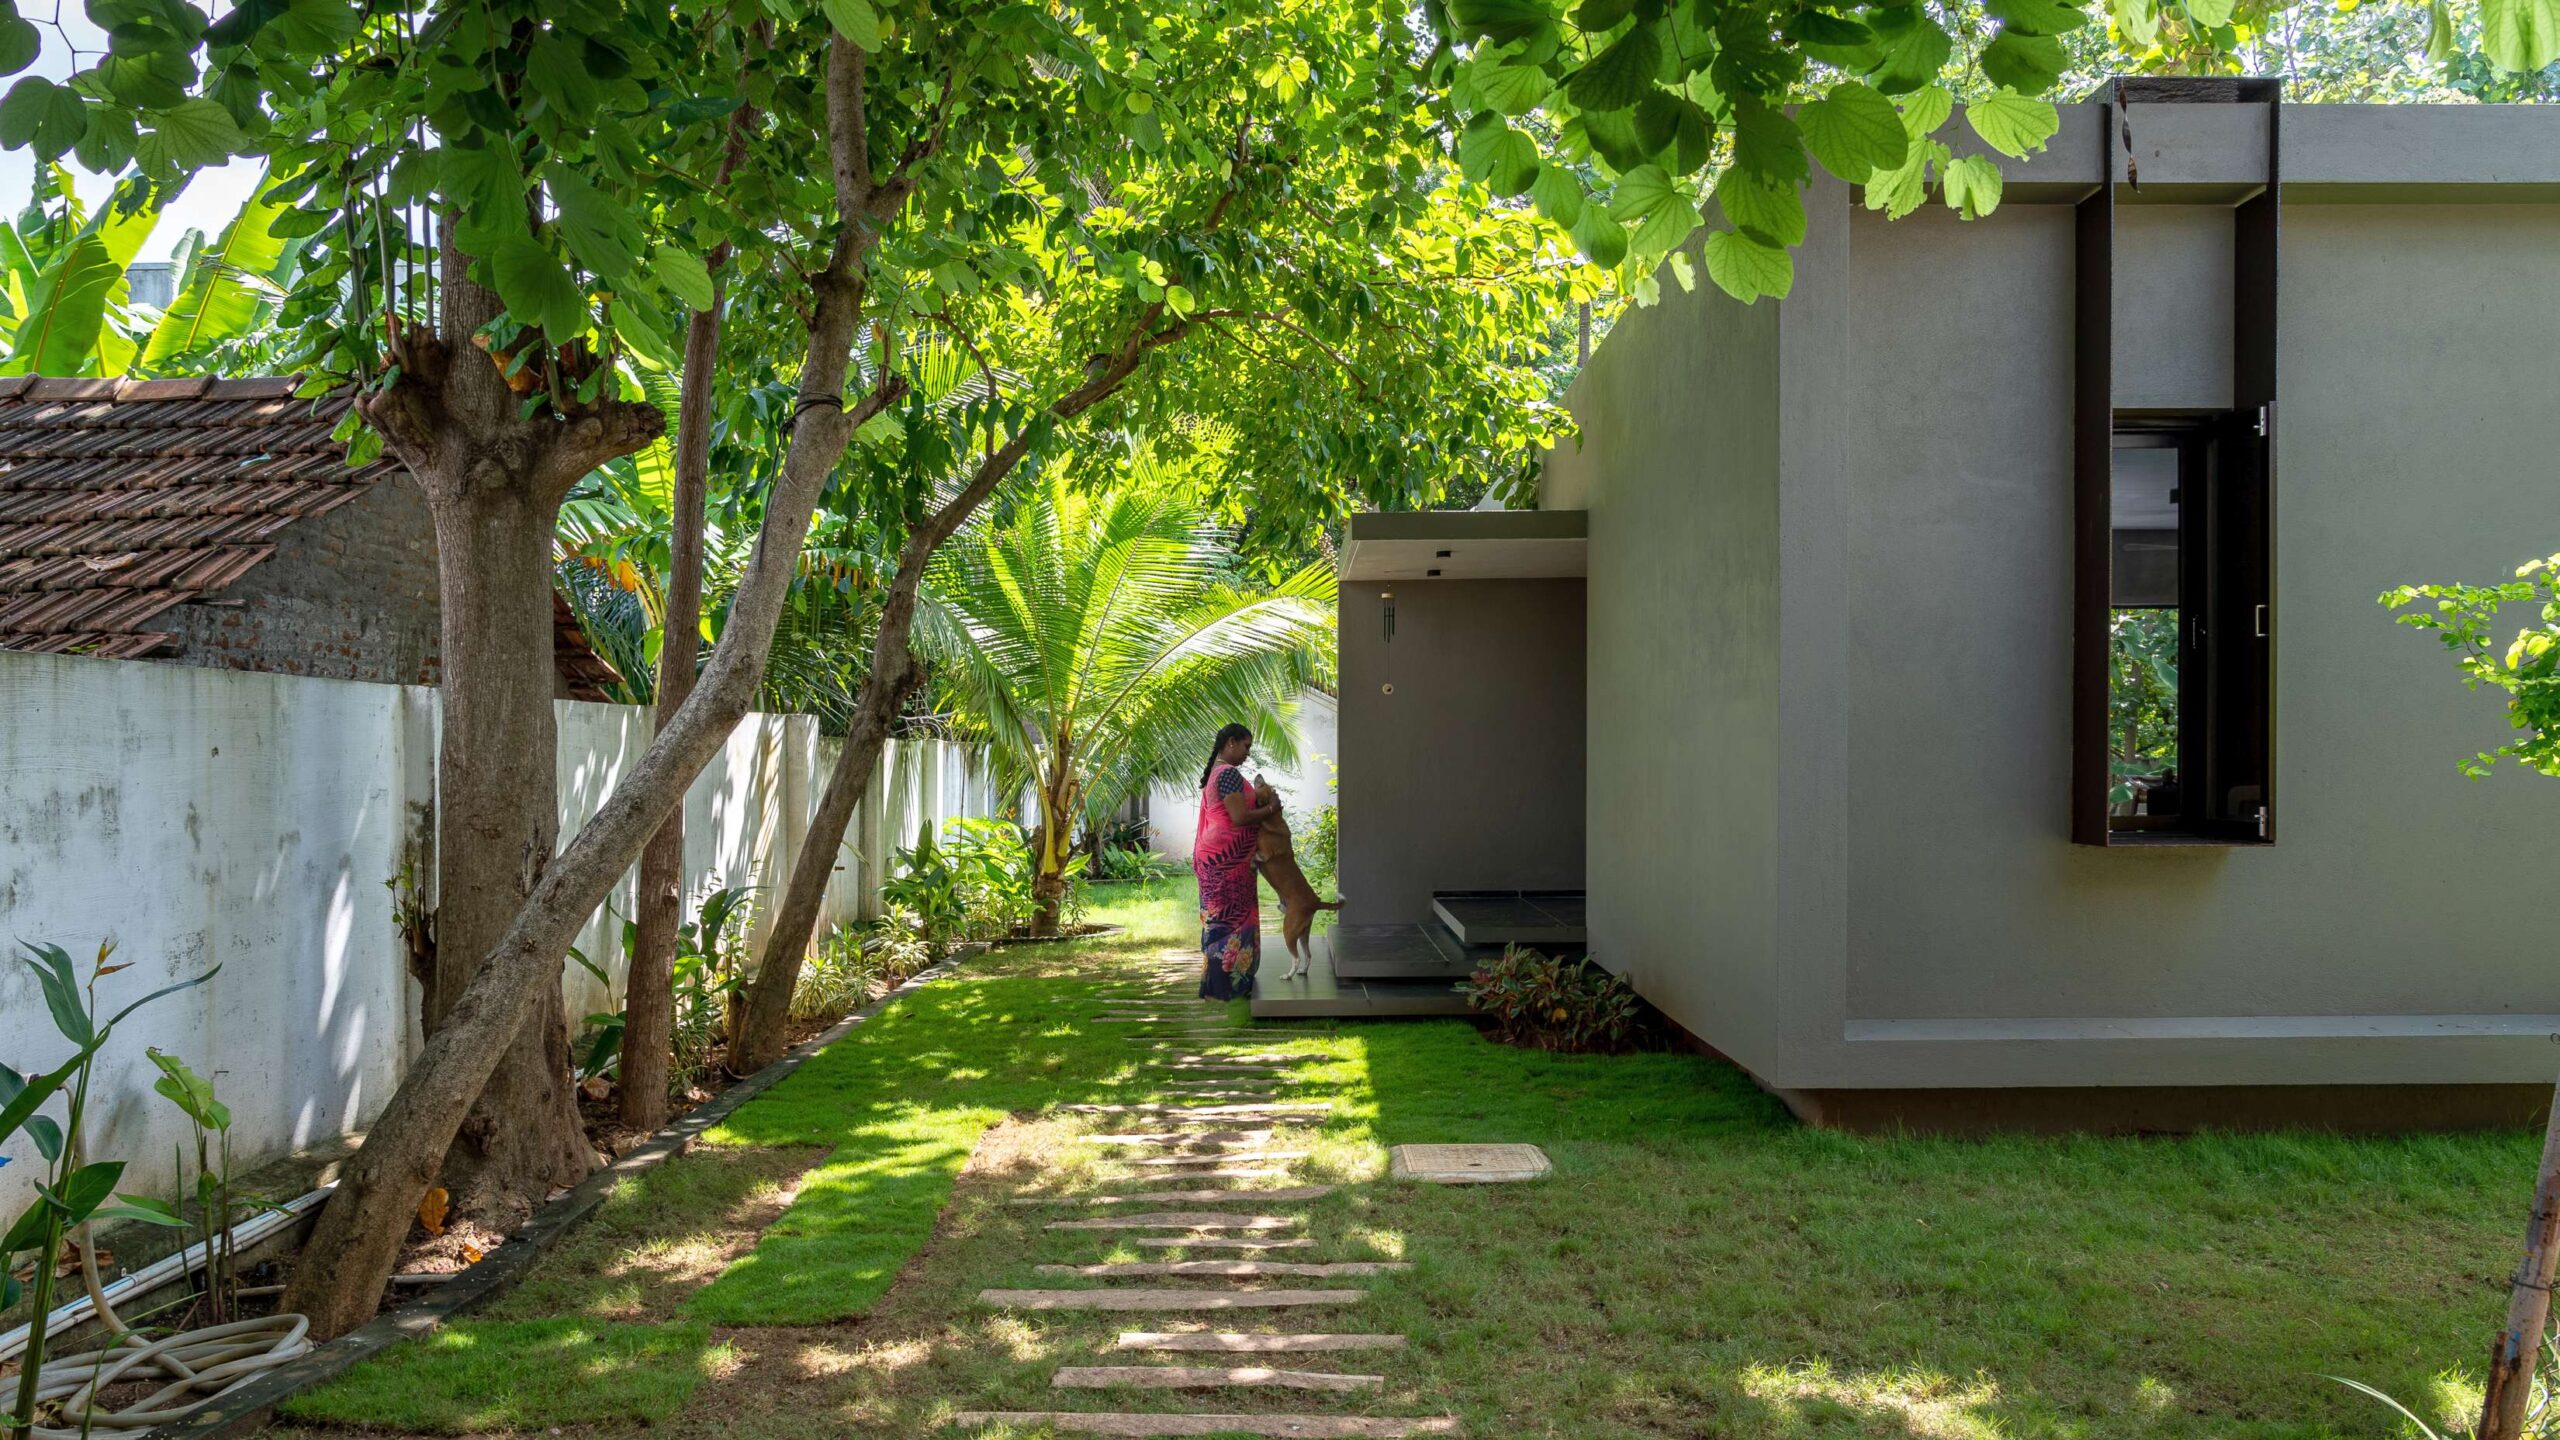 House on a Farm, Tamil Nadu, by Architecture_Interspace 7